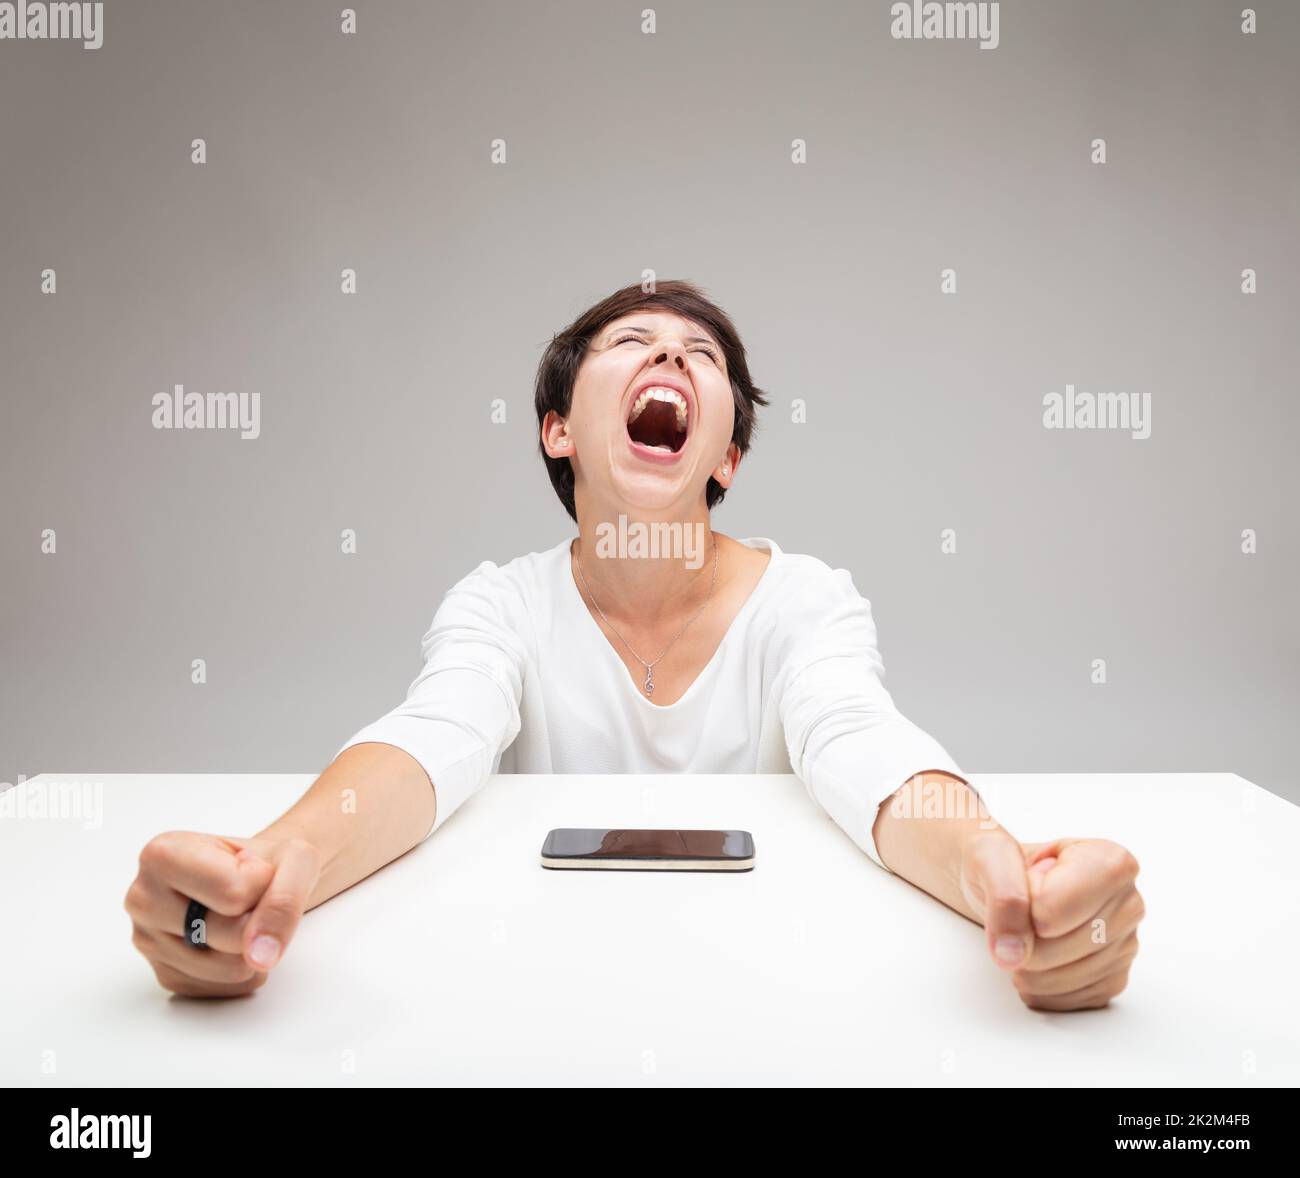 Frustrated woman throwing a temper tantrum Stock Photo